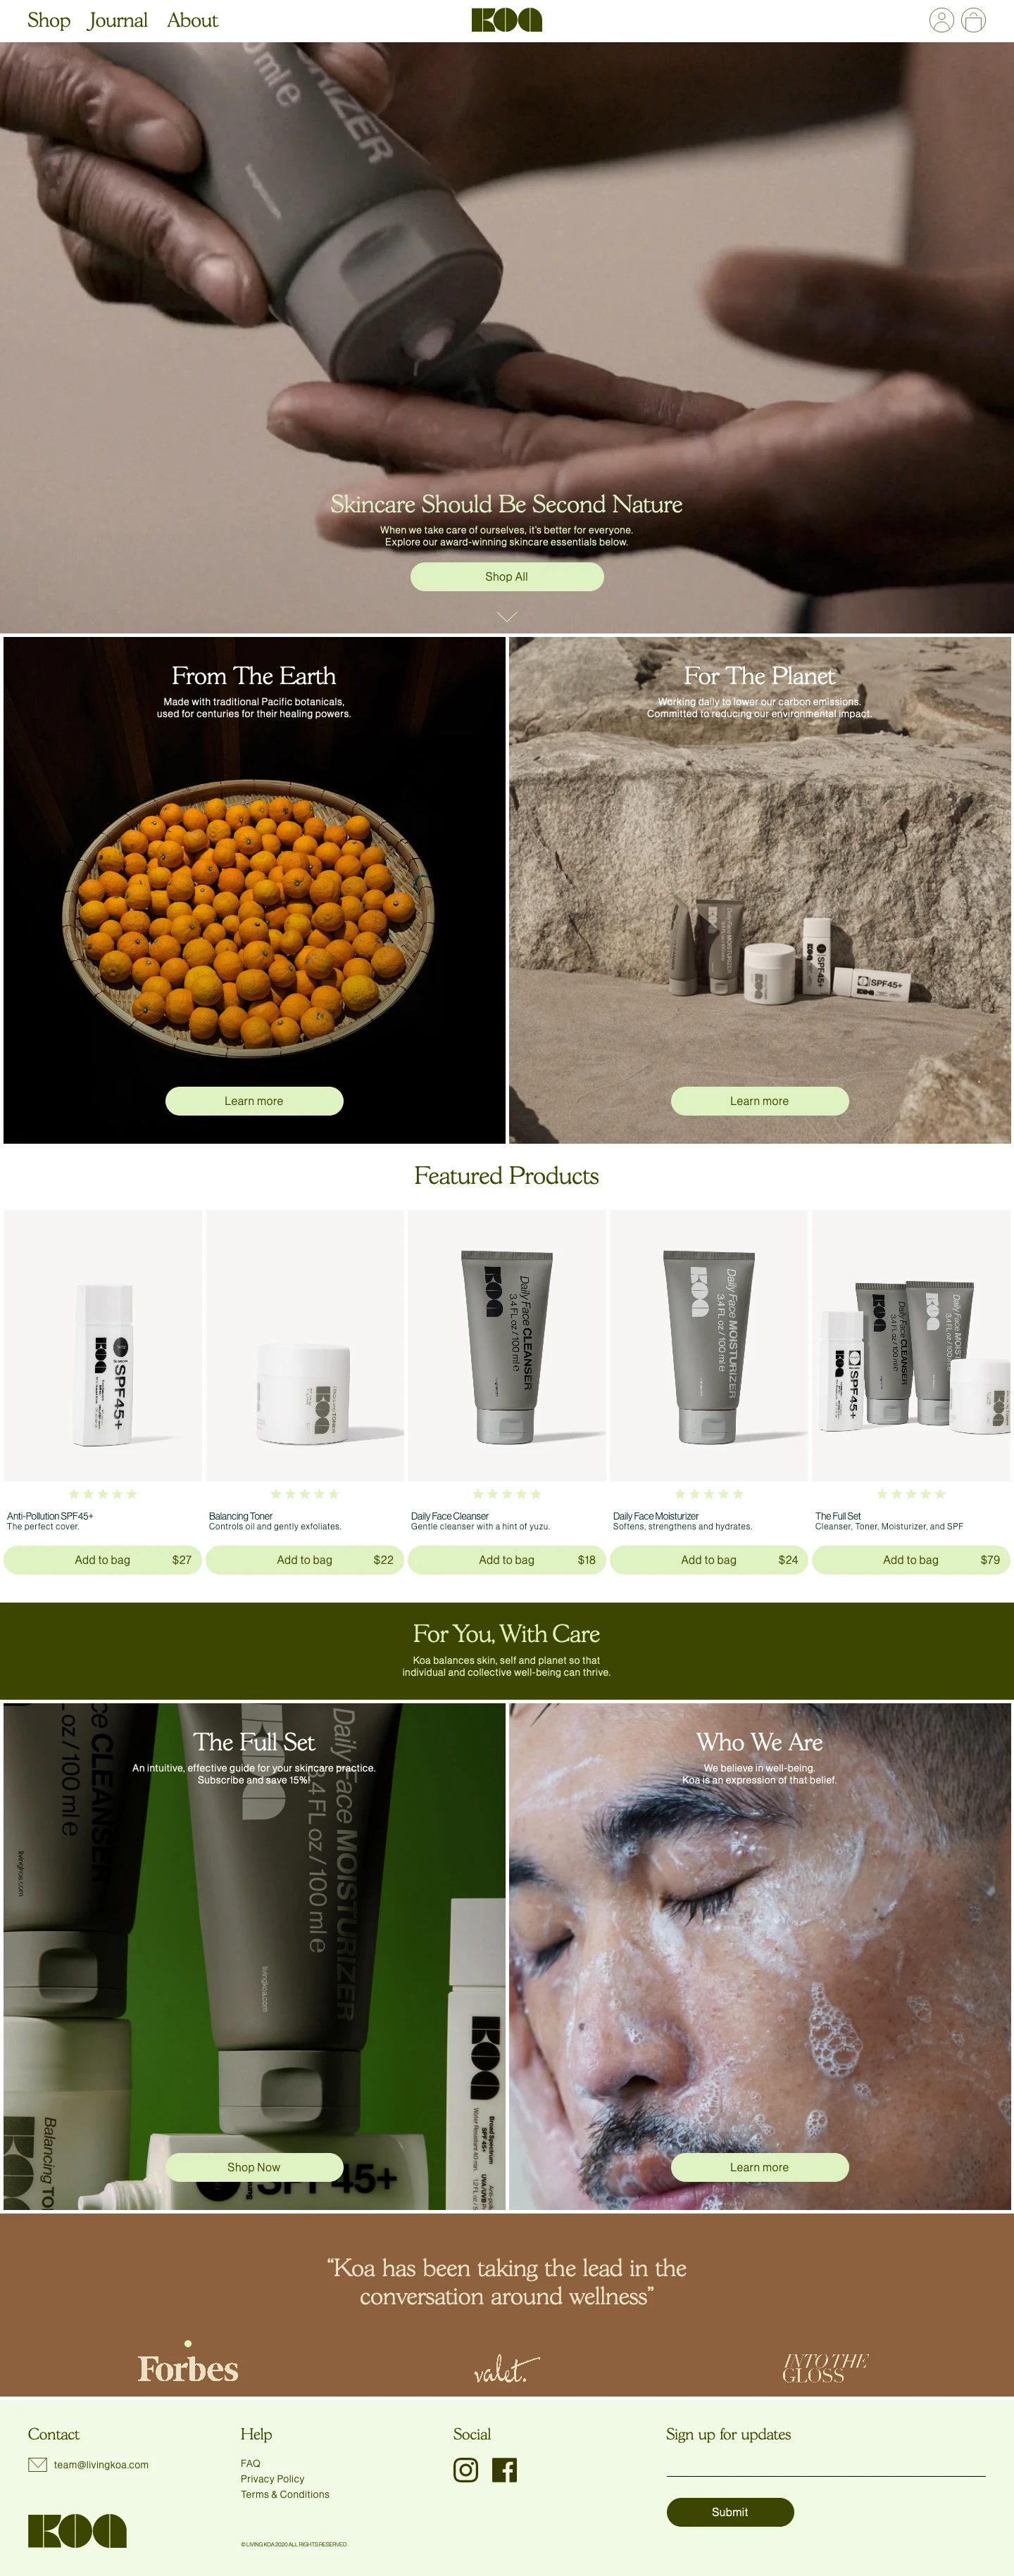 Koa Landing Page Example: Skincare essentials to help you look good and live better. Our products are thoughtfully formulated, easy to use, and built with the planet in mind.⁠